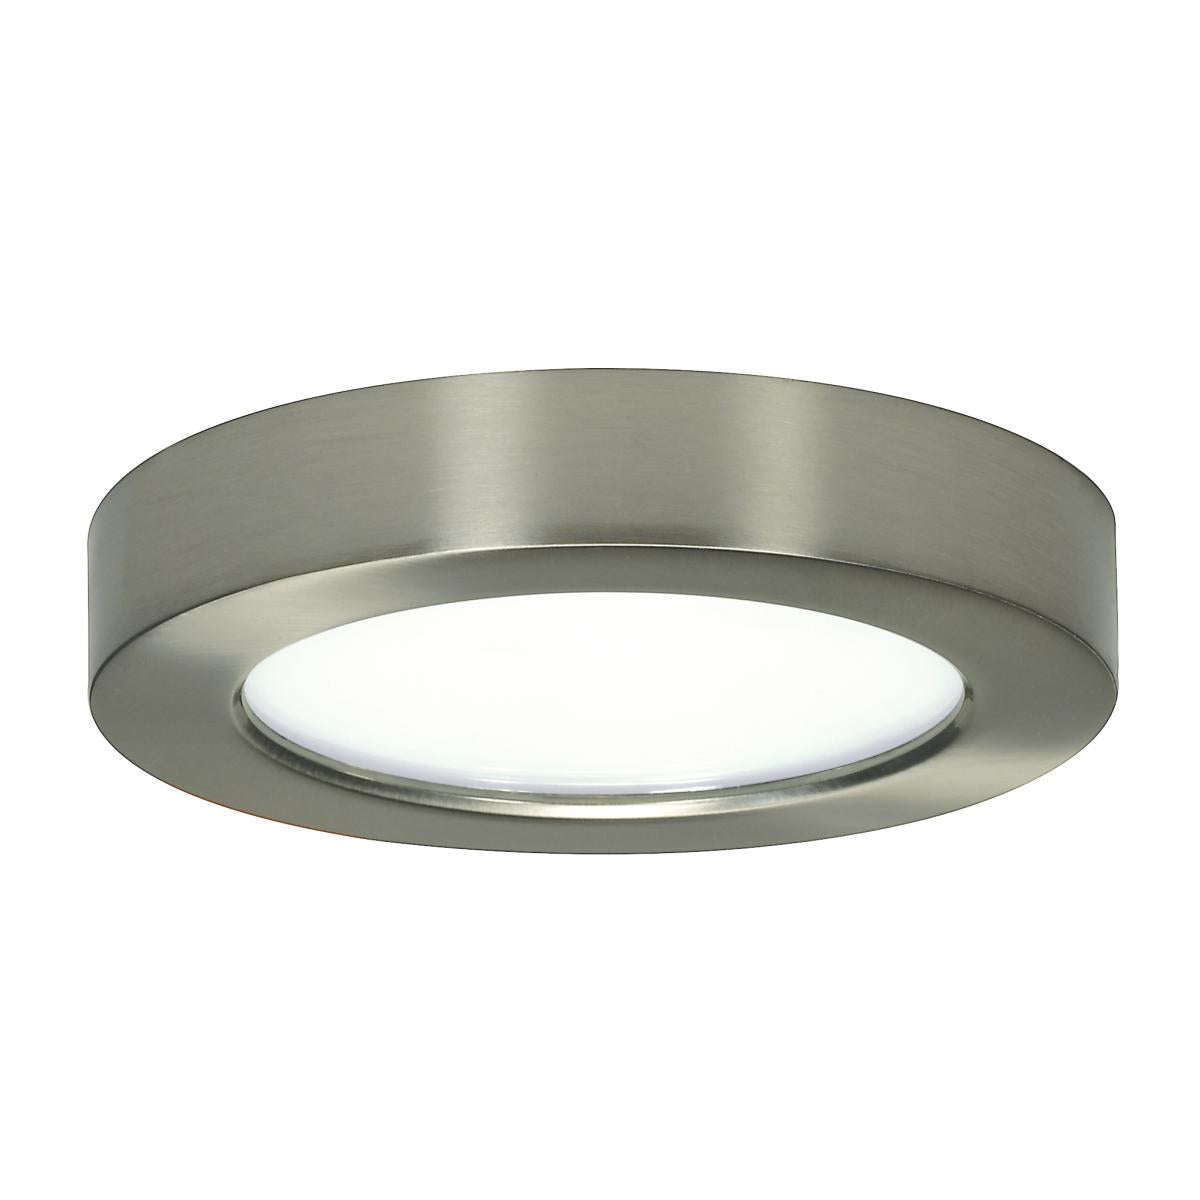 Replacement for Satco S29321 10.5 watt 5.5" Flush Mount LED Fixture 2700K Round Shape Brushed Nickel Finish 120 volts - NOW 62/1703